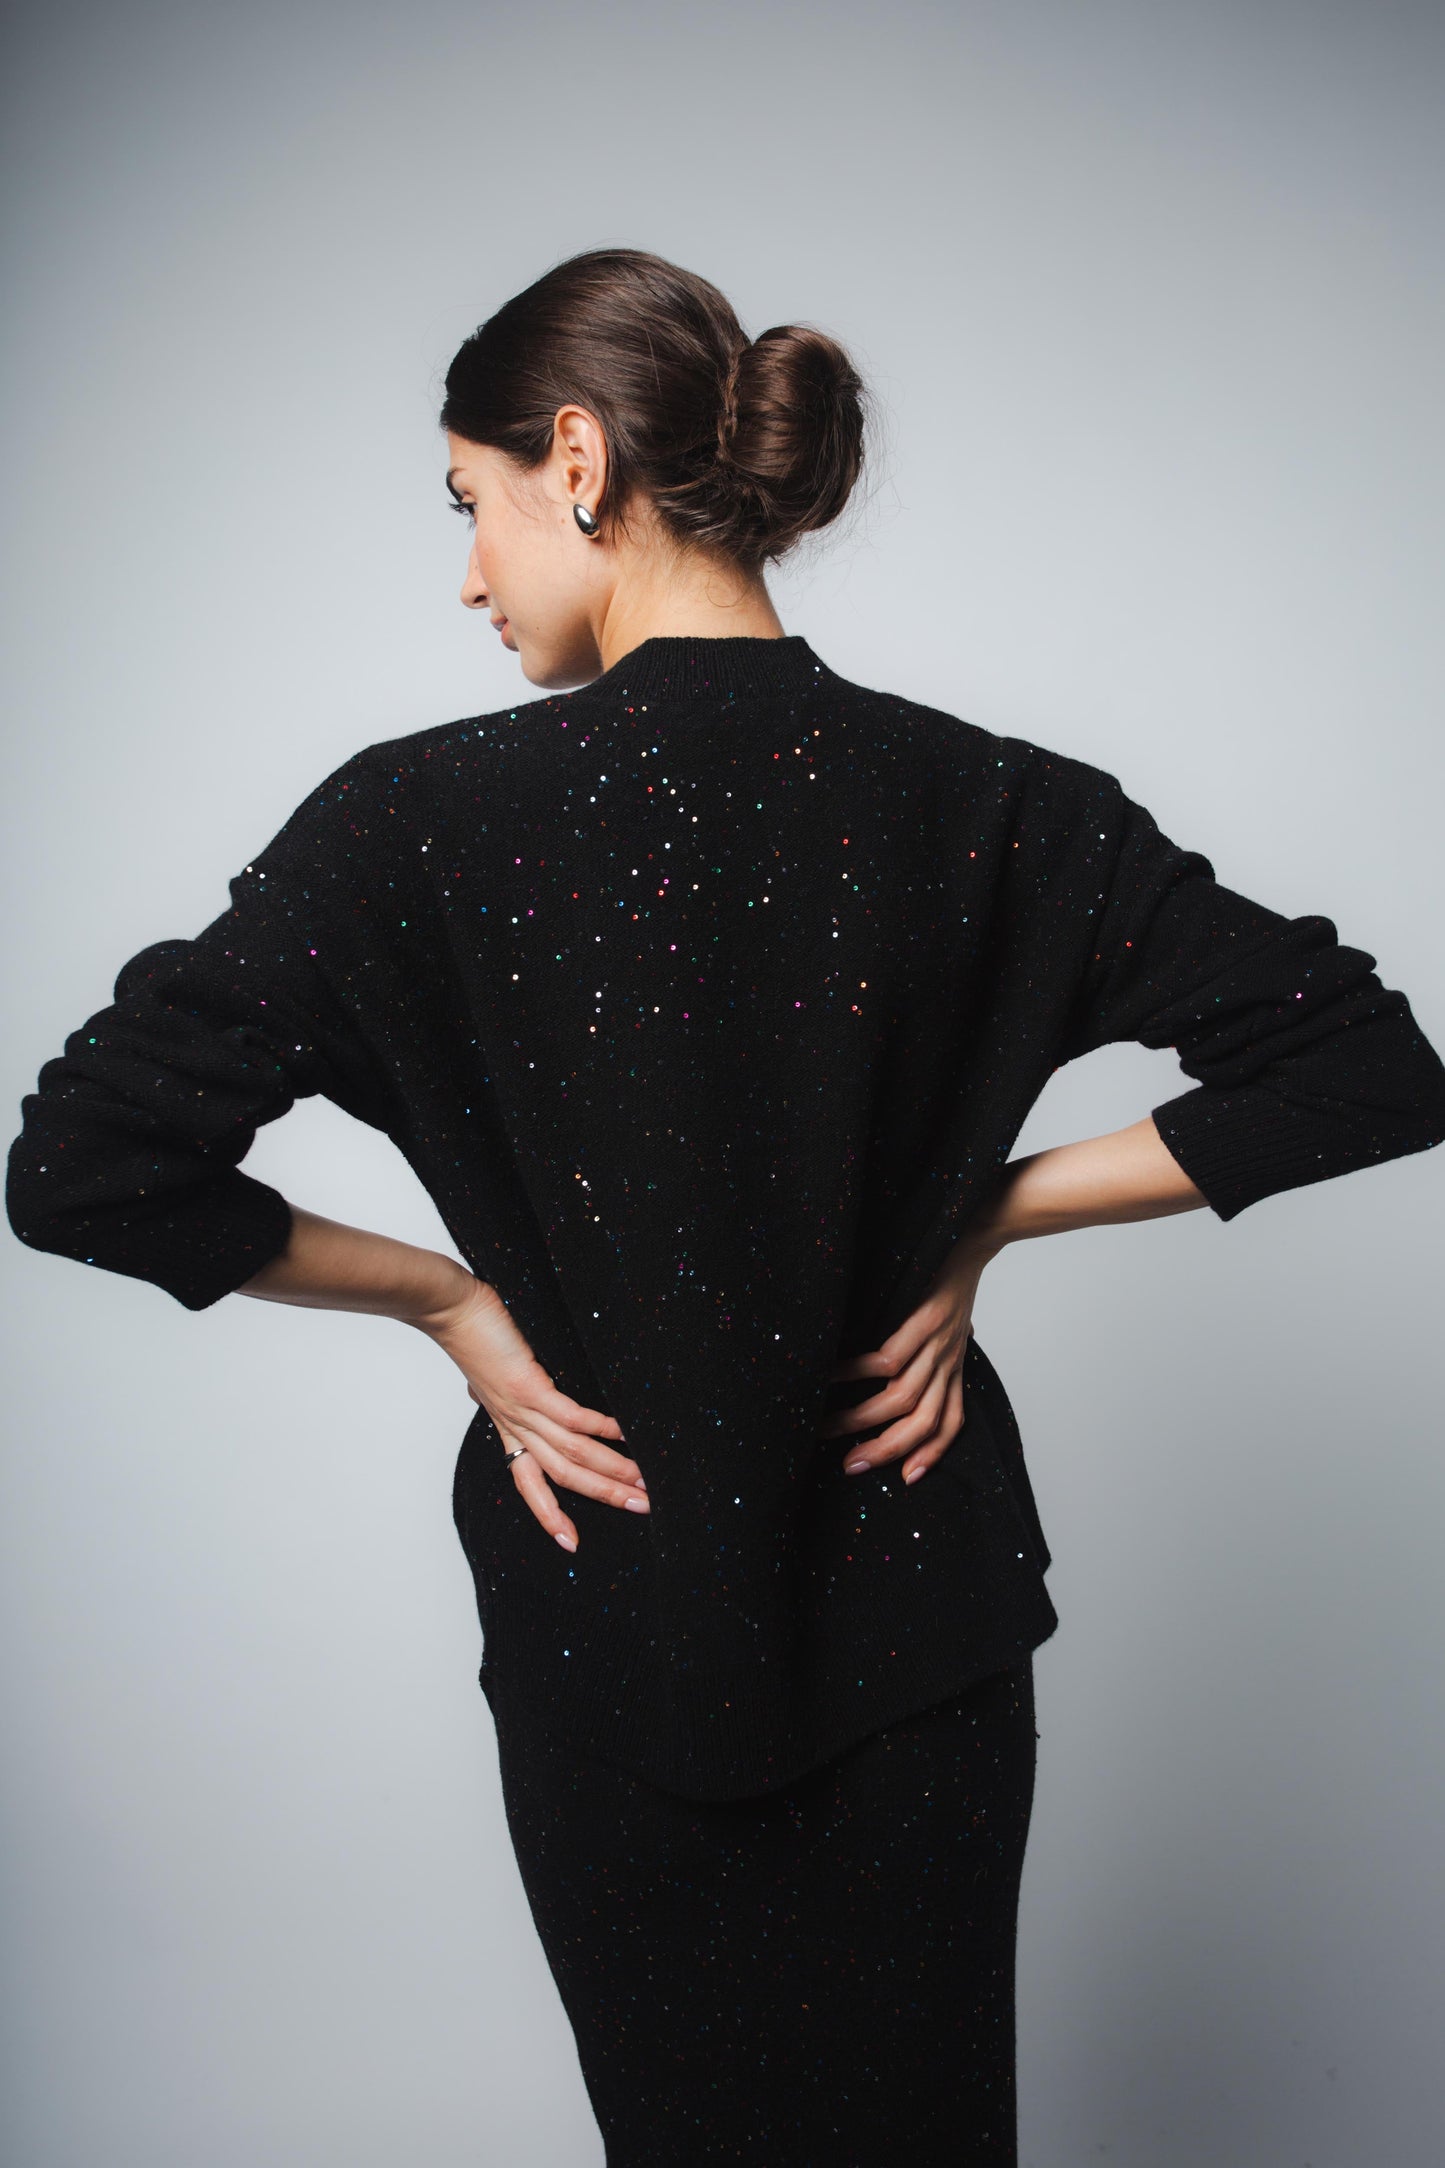 SANTICLER Italian cashmere and sequin sweater in Black Sparkle